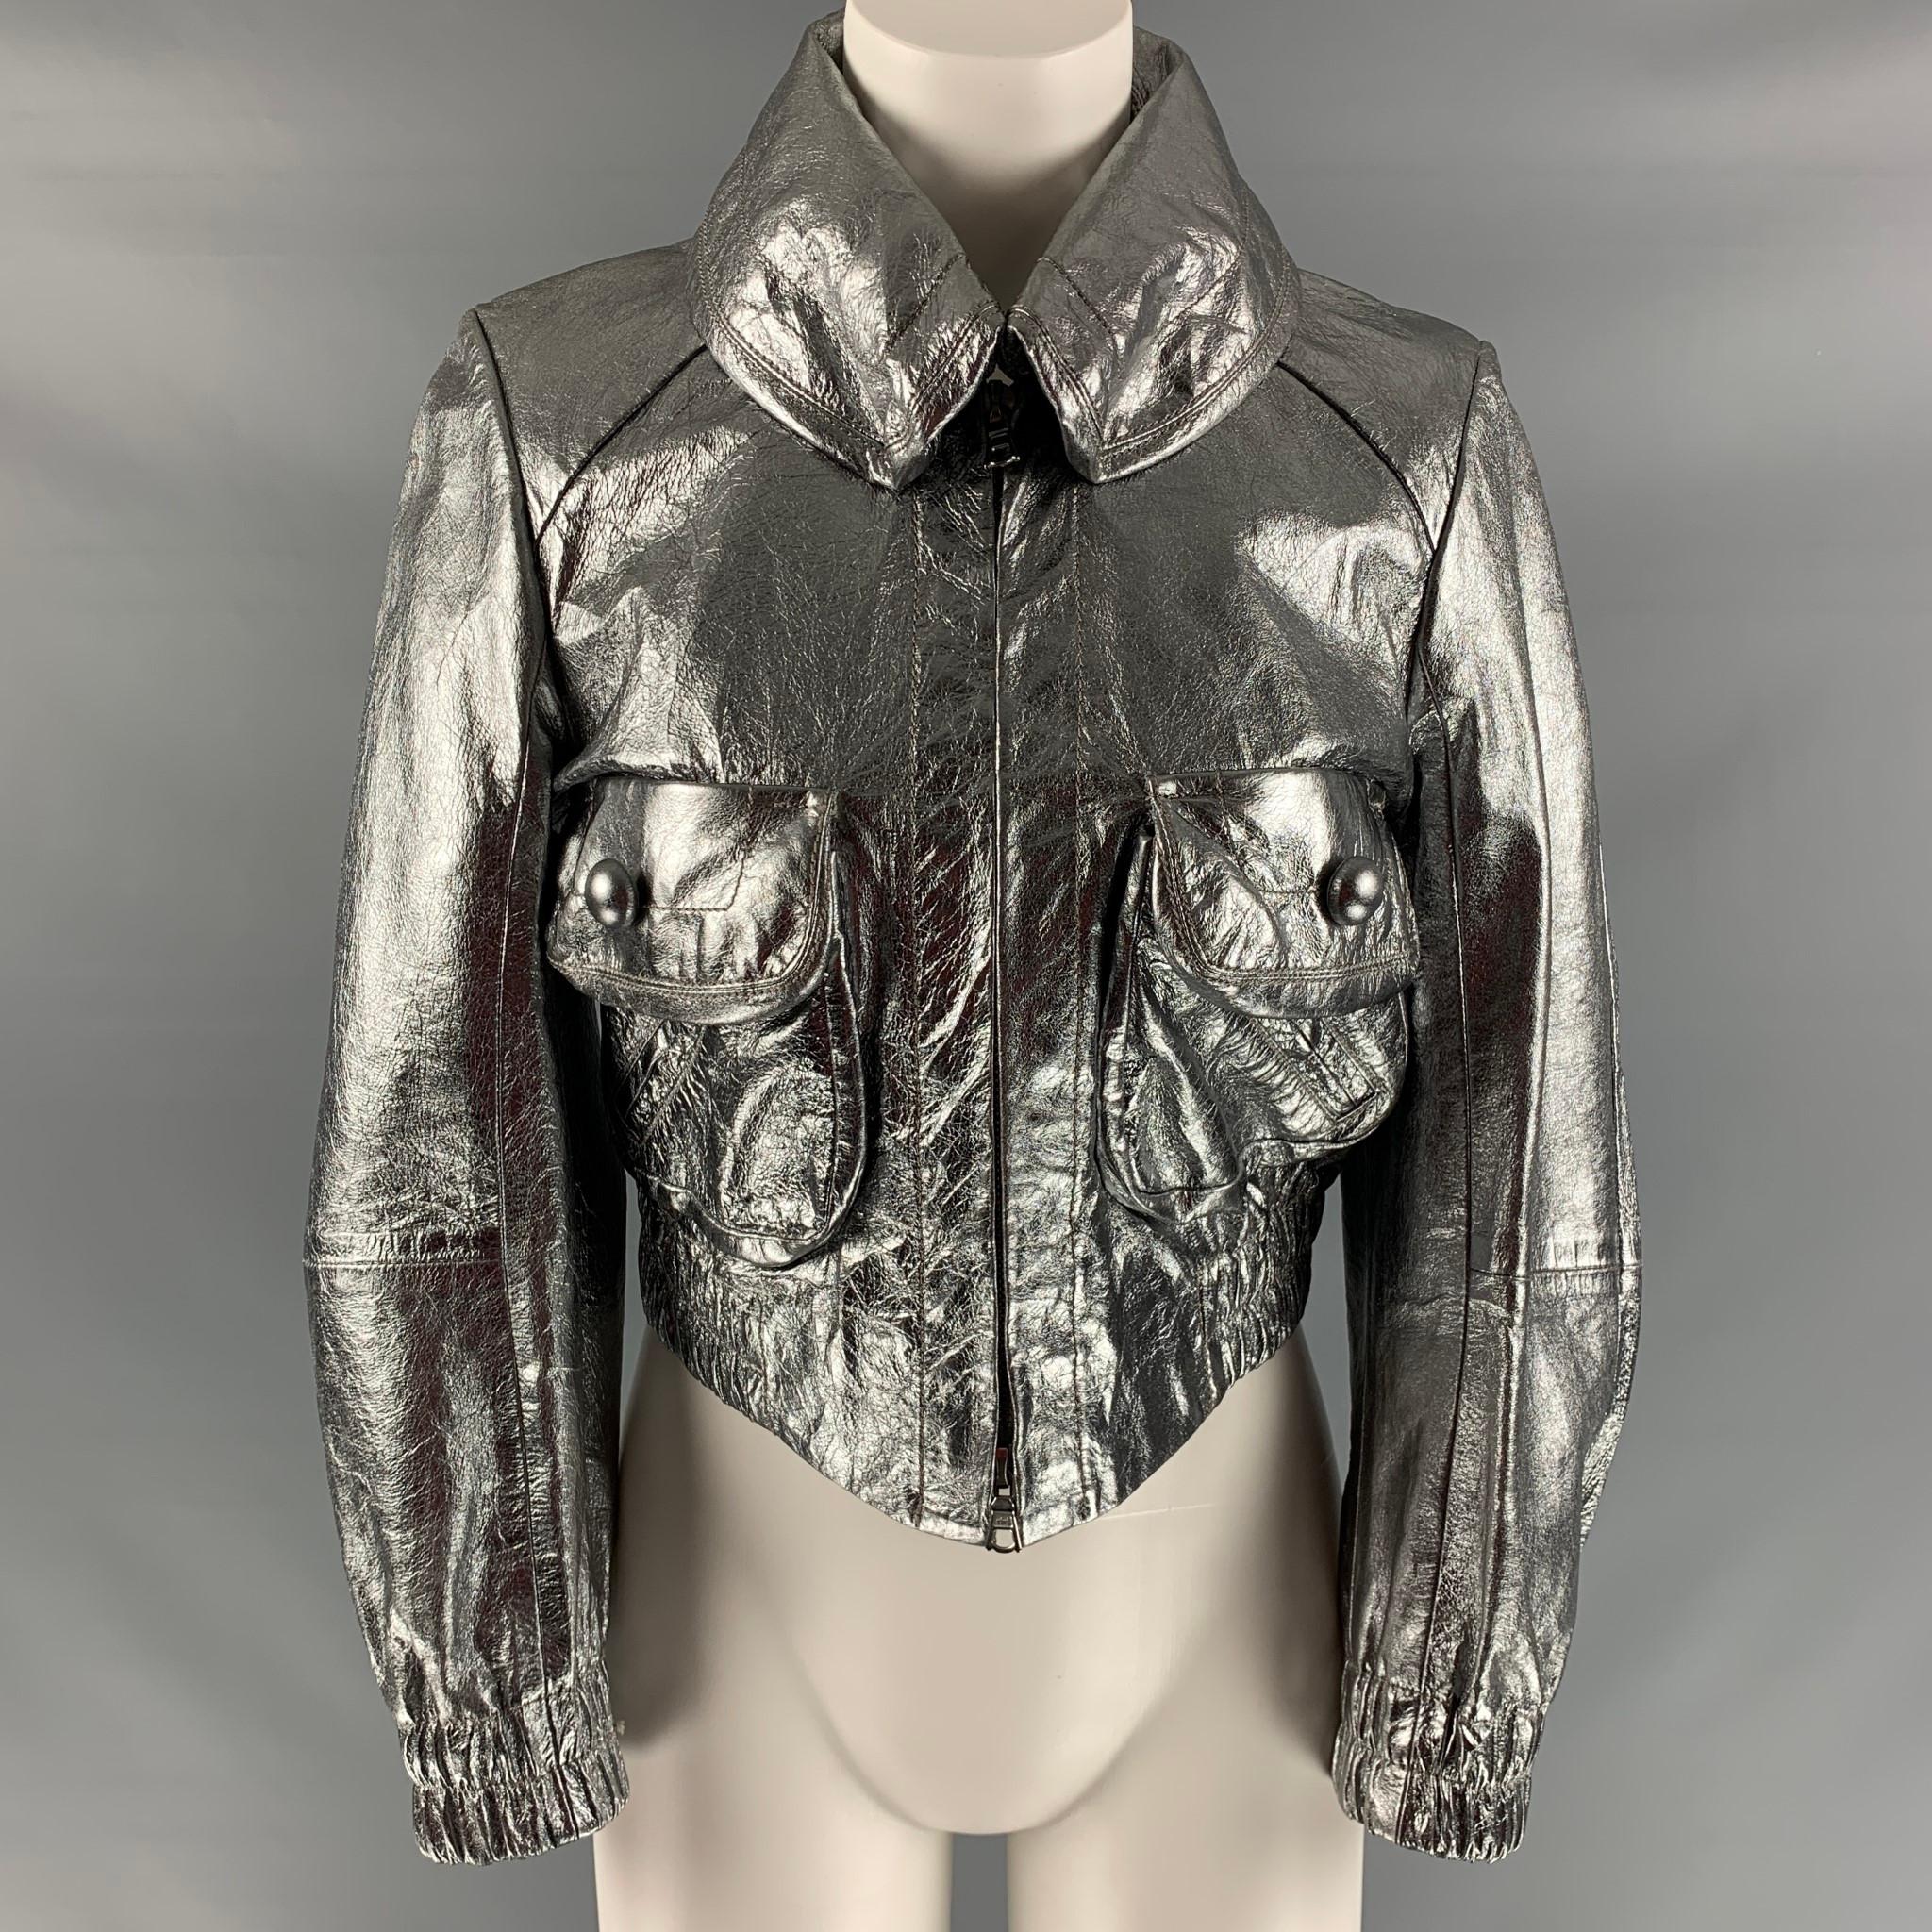 MARC JACOBS cropped jacket comes in silver metallic leather featuring high neck, zip up closure, and two patch with flap pockets at front. Made in USA.

Excellent Pre-Owned Condition.
Marked: 8

Measurements:

Shoulder: 16 in.
Bust: 37 in.
Sleeve: